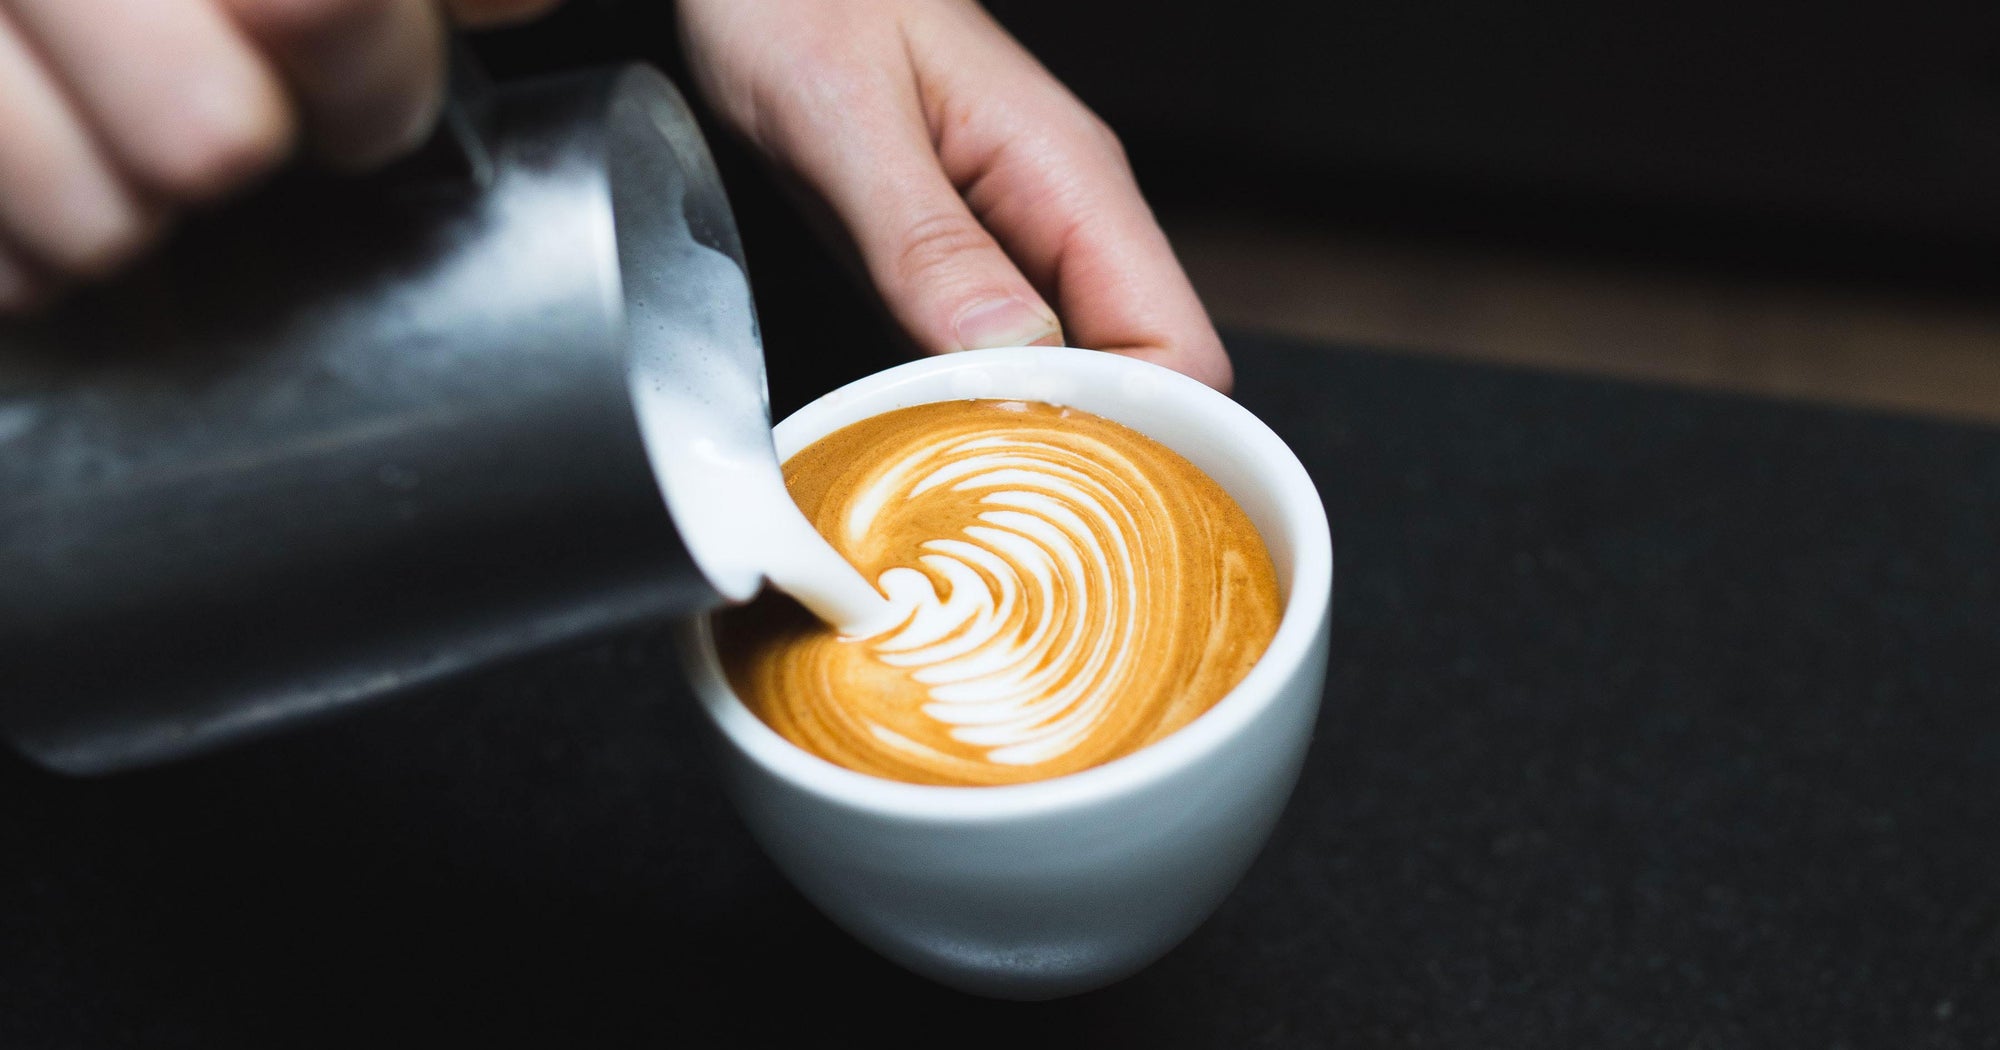 rosetta latte art being poured into a white cup